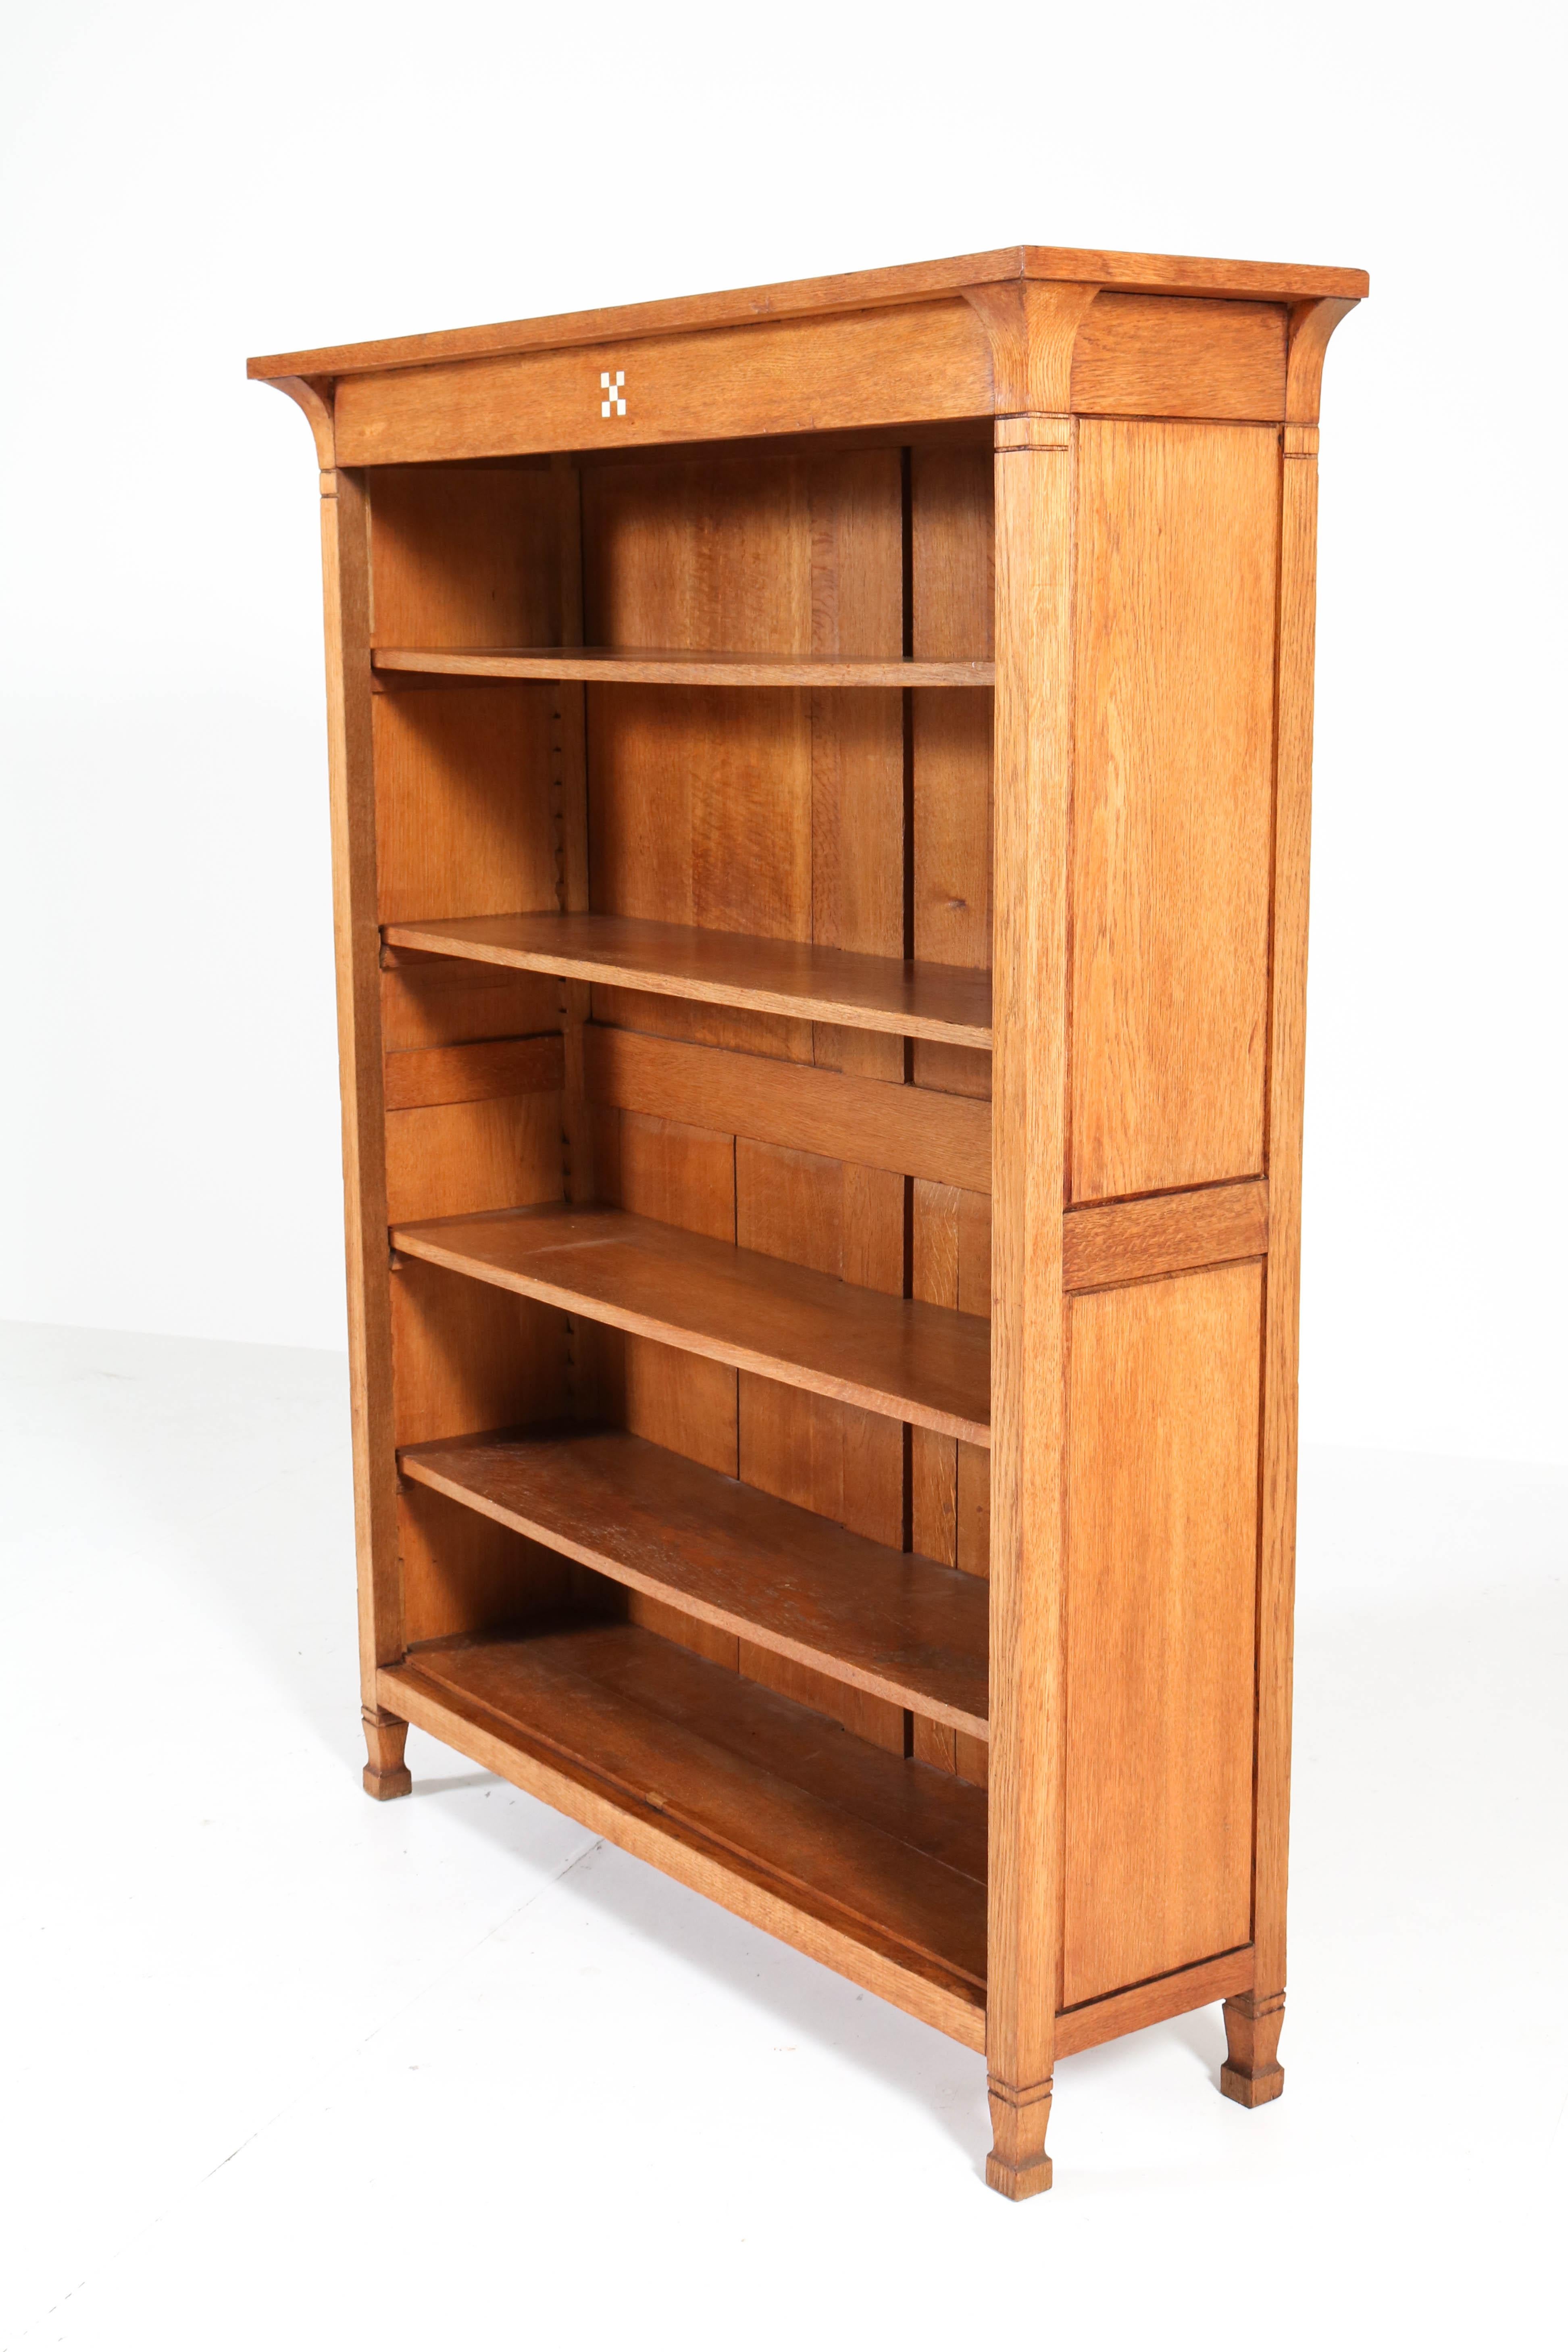 Stunning and rare Art Nouveau Arts & Crafts open bookcase.
Striking Dutch design from the 1900s.
Solid oak with four original solid oak shelves adjustable in height.
In the style of Onder den Sint Maarten.
In good original condition with minor